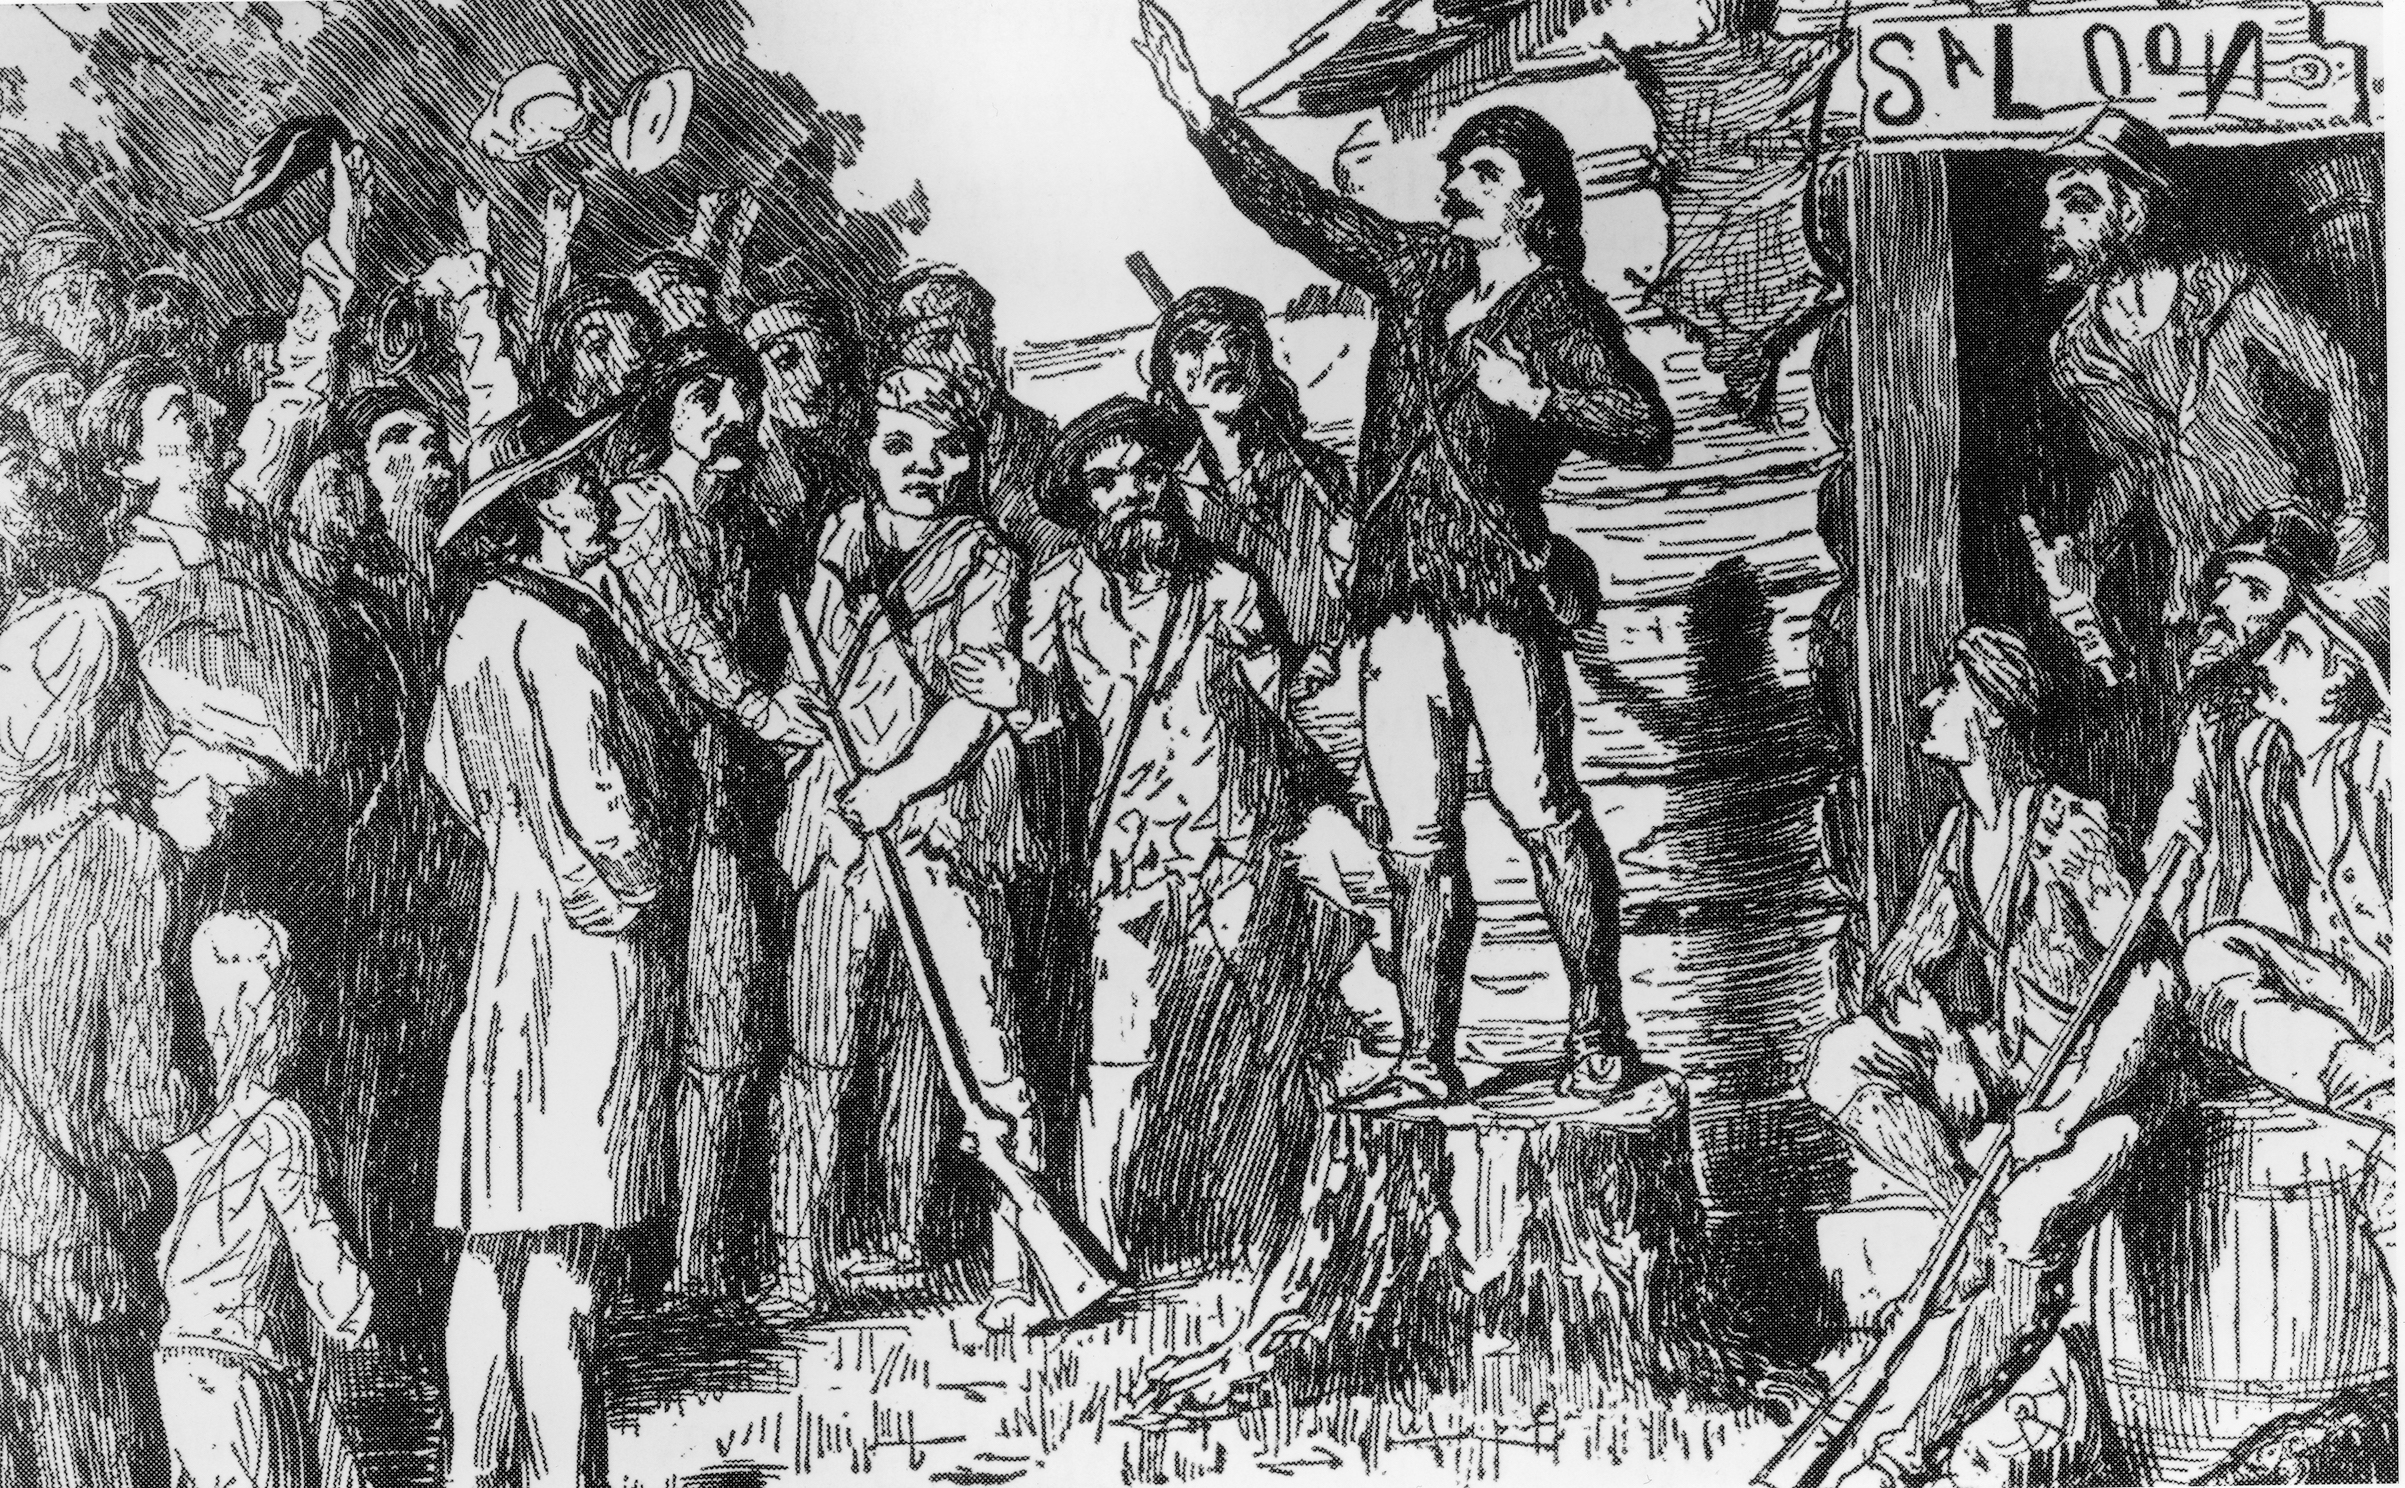 Illustration of Davy Crockett campaigning for the House of Representatives to a group of people, circa 1800s. (Fotosearch/Getty Images)